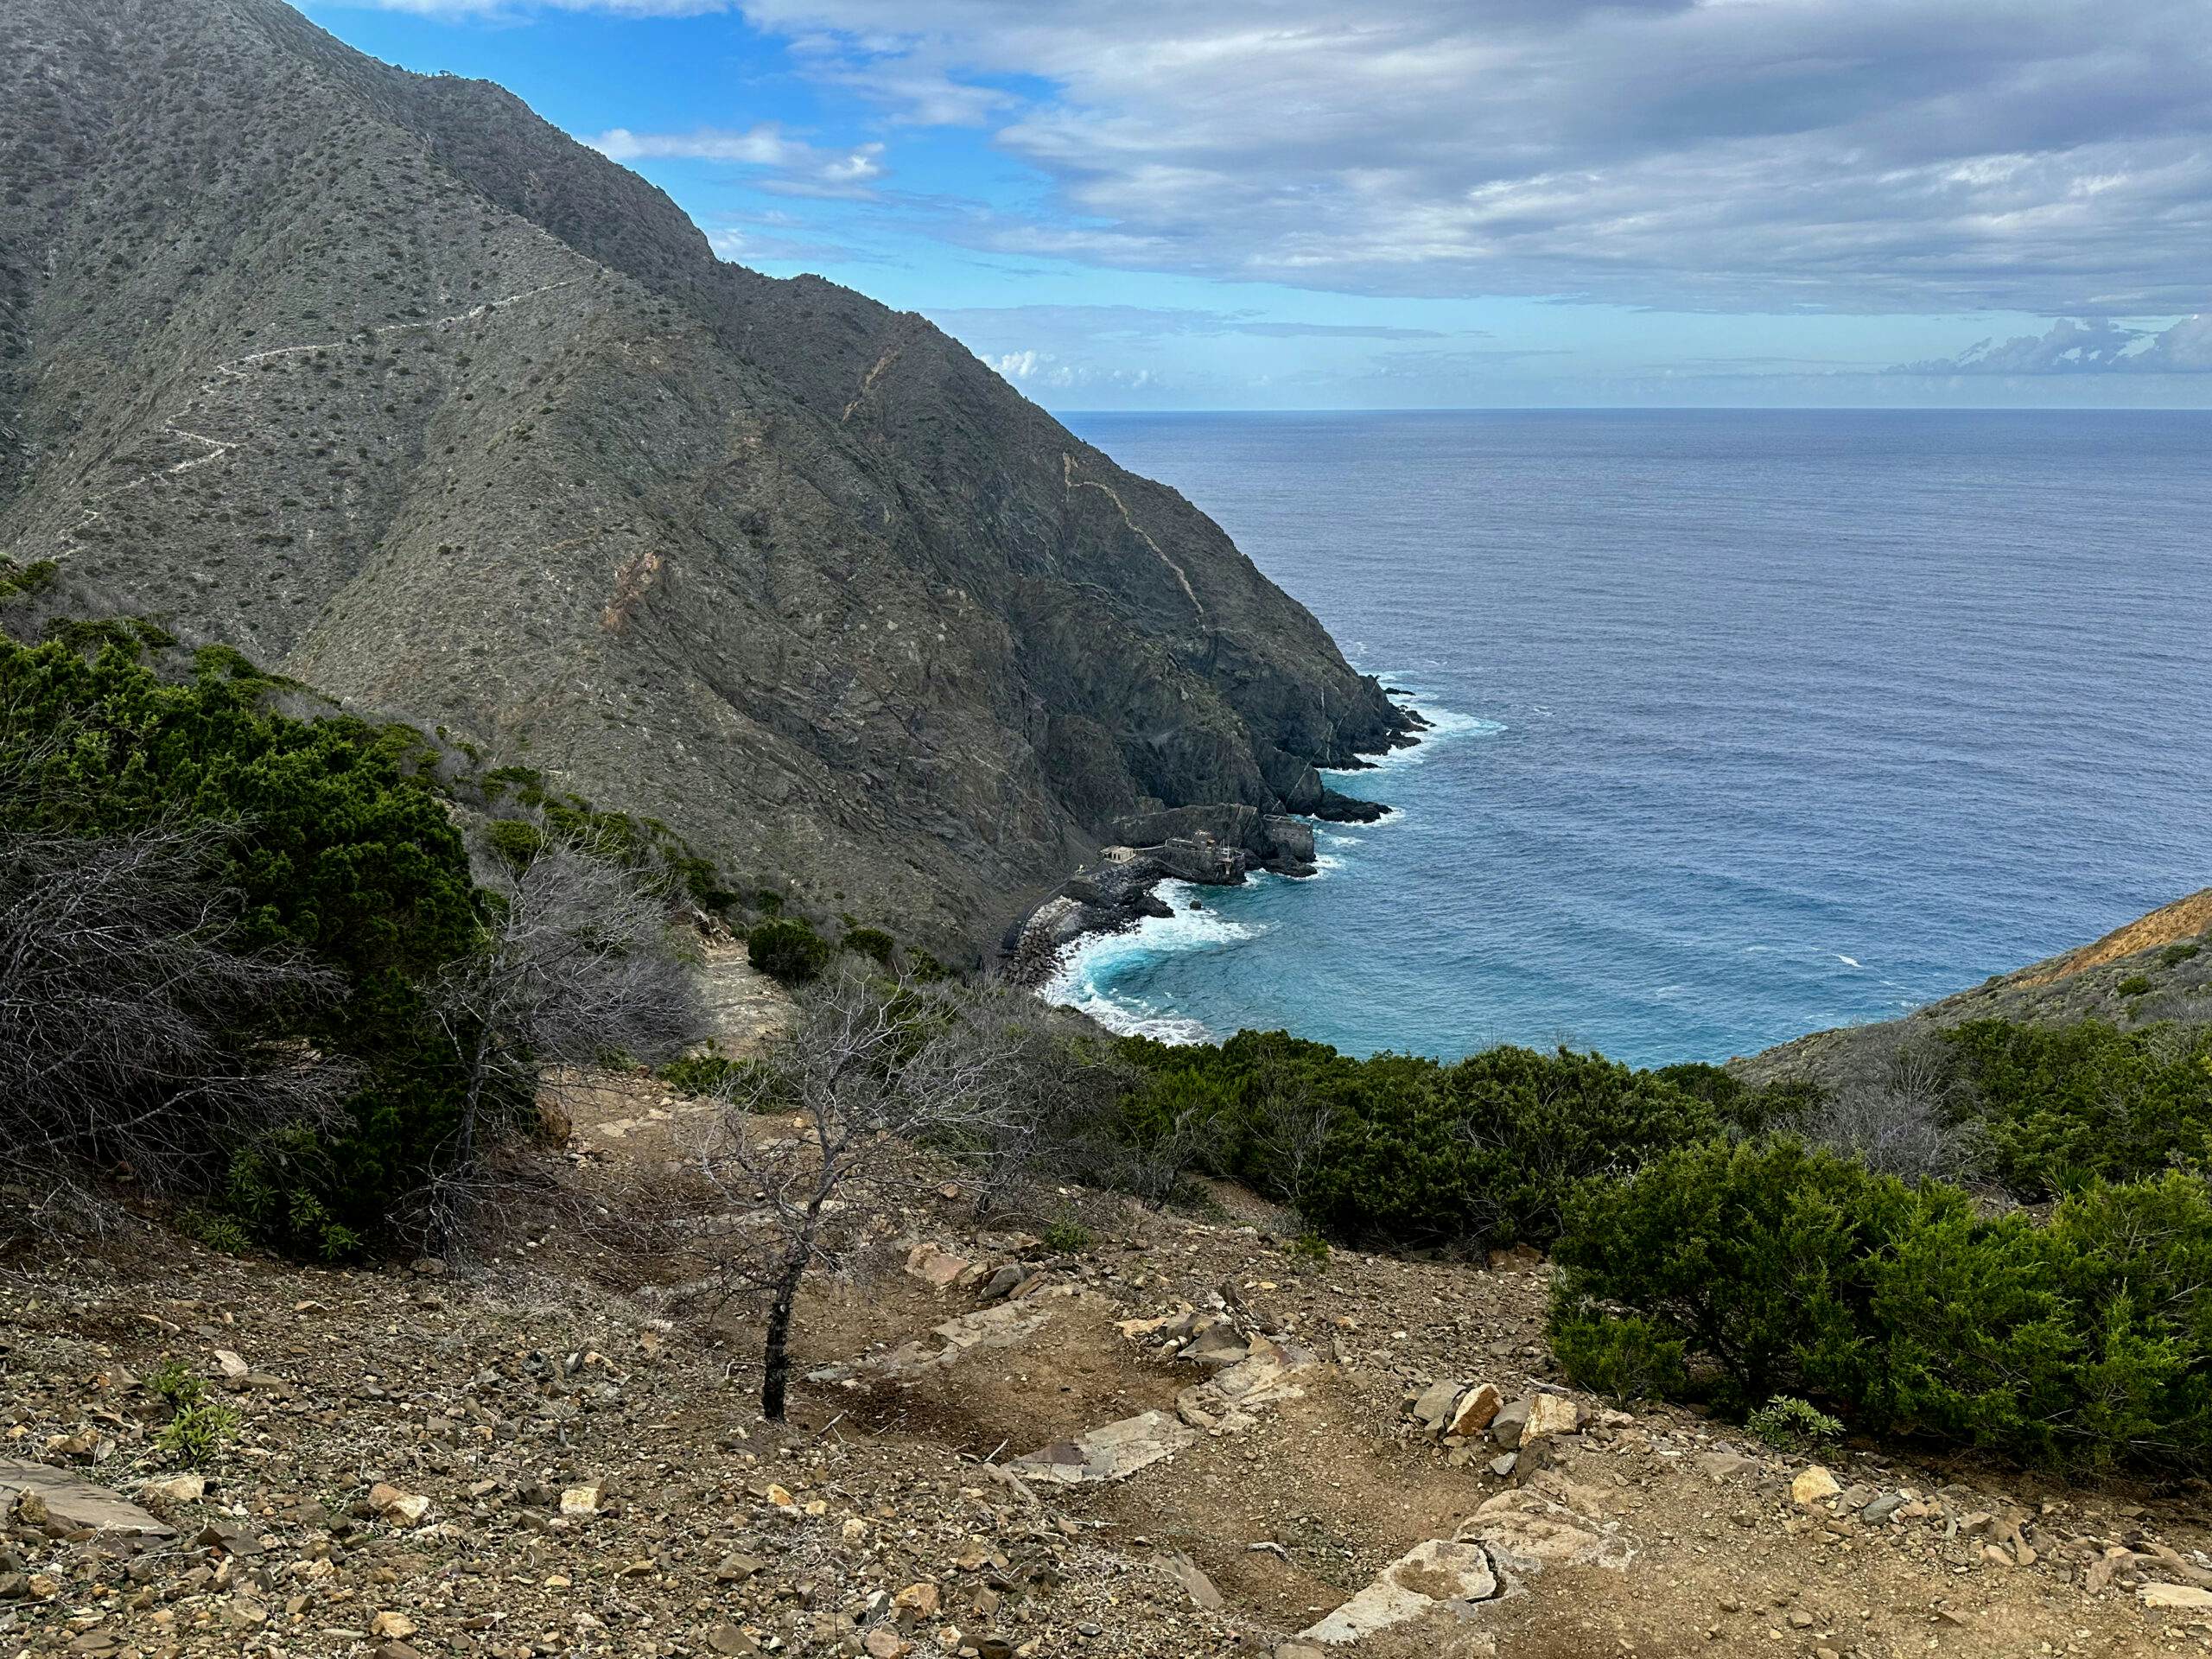 Hiking trail along the coast towards Vallehermoso GR 132, 2nd stage